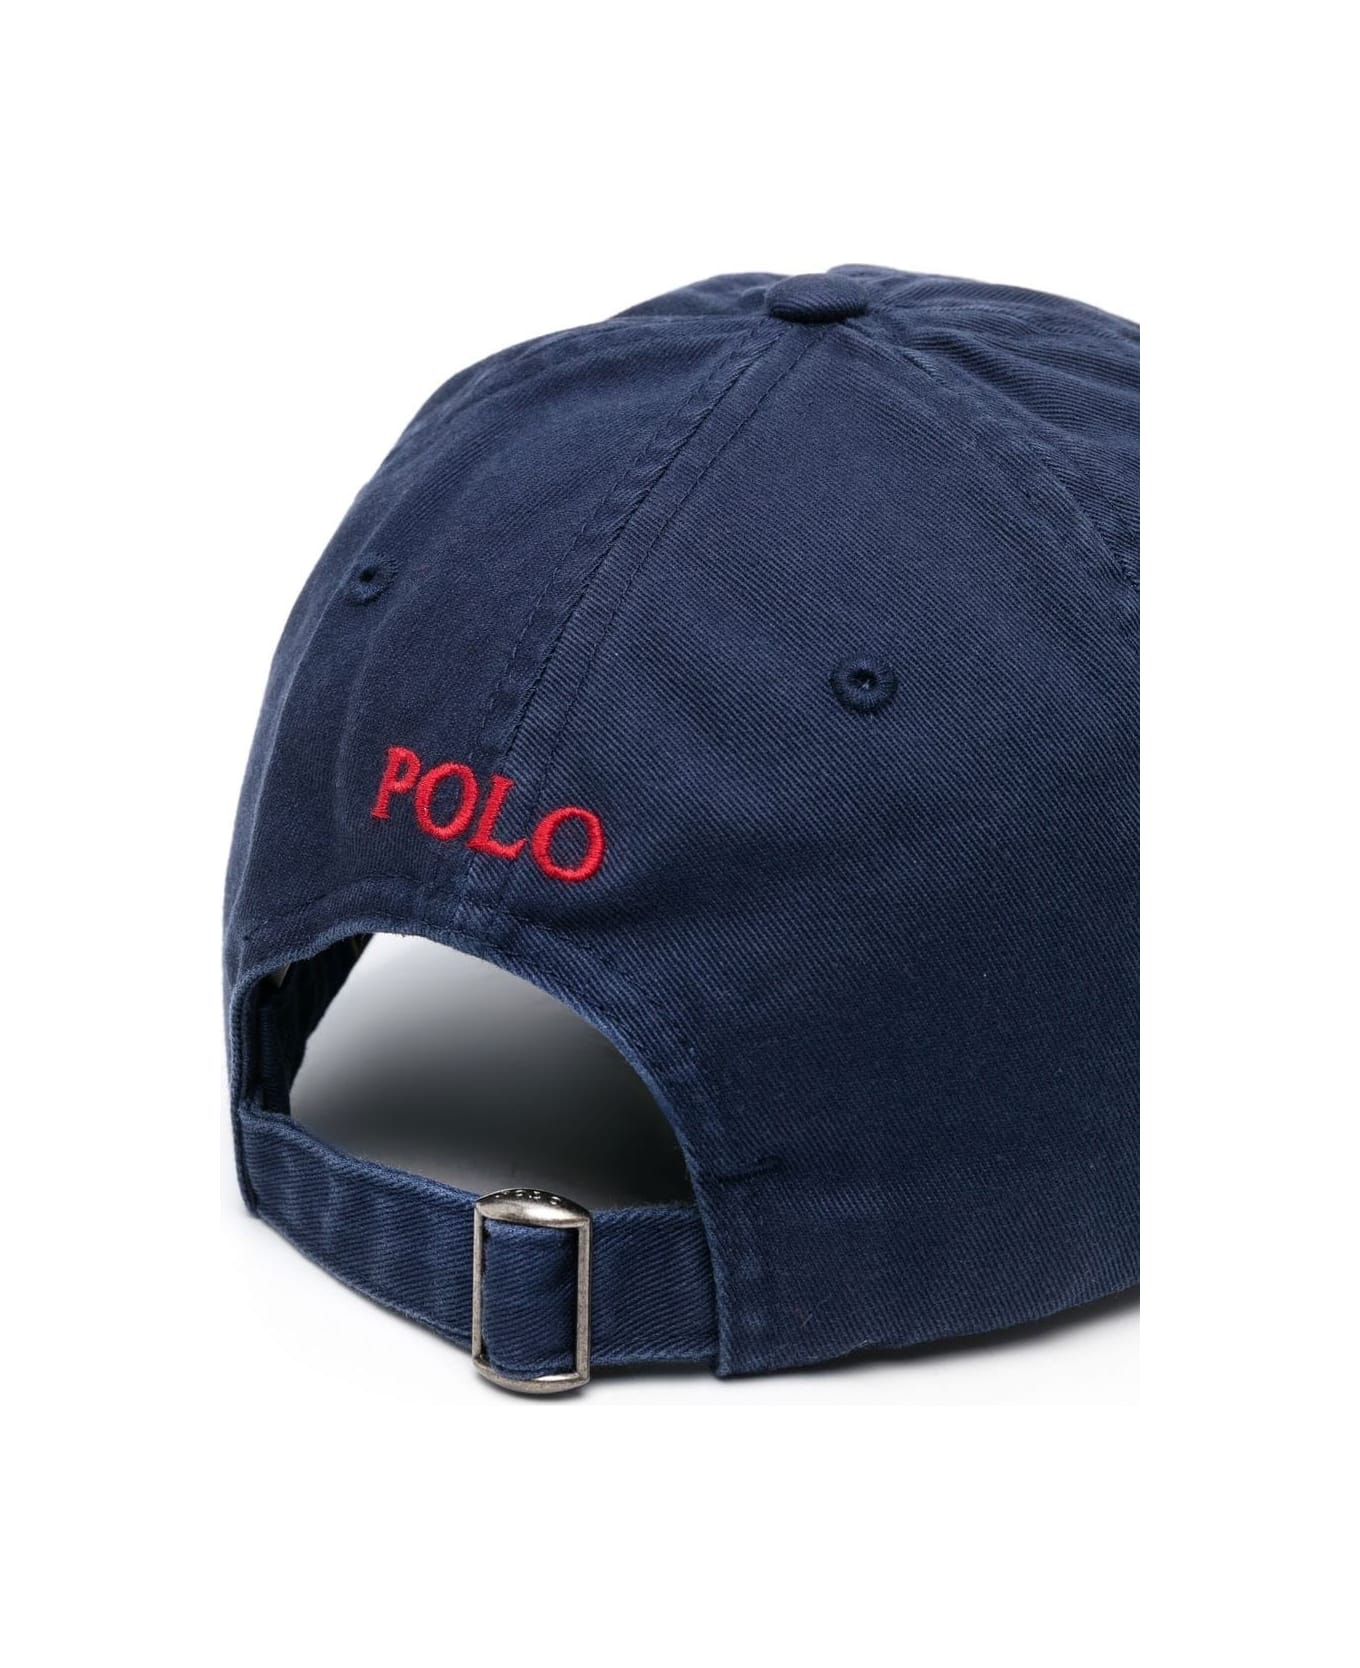 Ralph Lauren Night Blue Baseball Hat With Red Pony - Blue